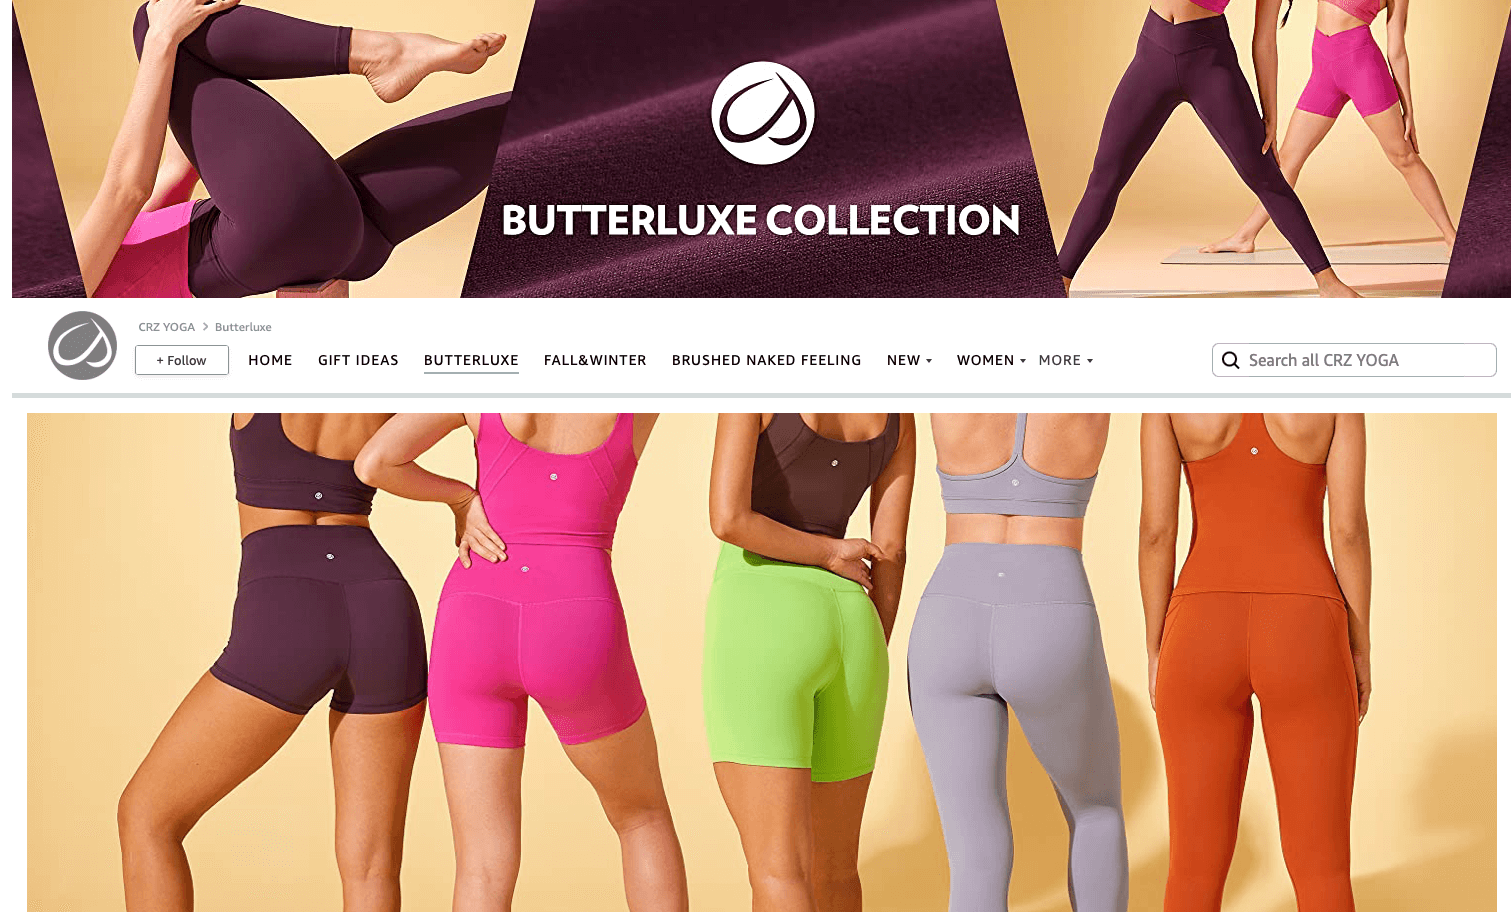 screenshot from amazon website showing crz yoga butterluxe collection